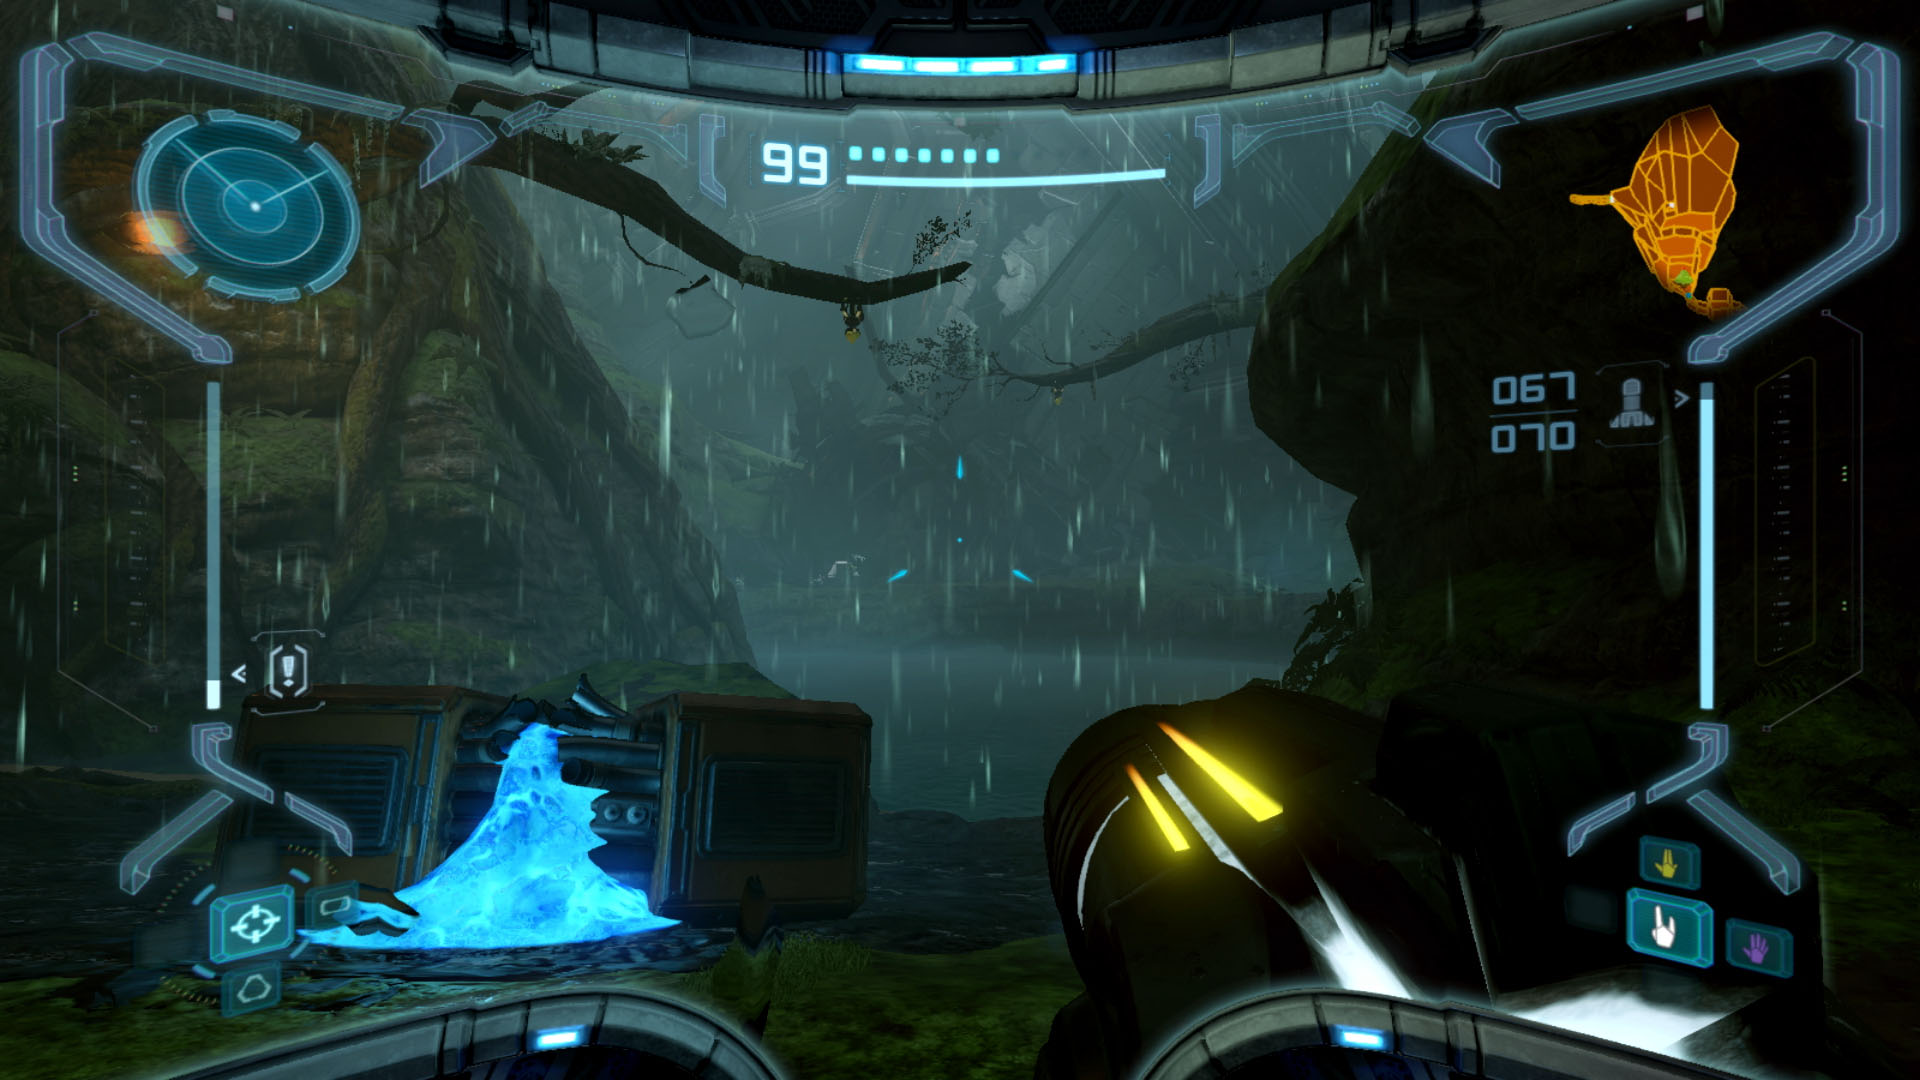 Review: METROID PRIME REMASTERED is Exactly What a Remaster Should